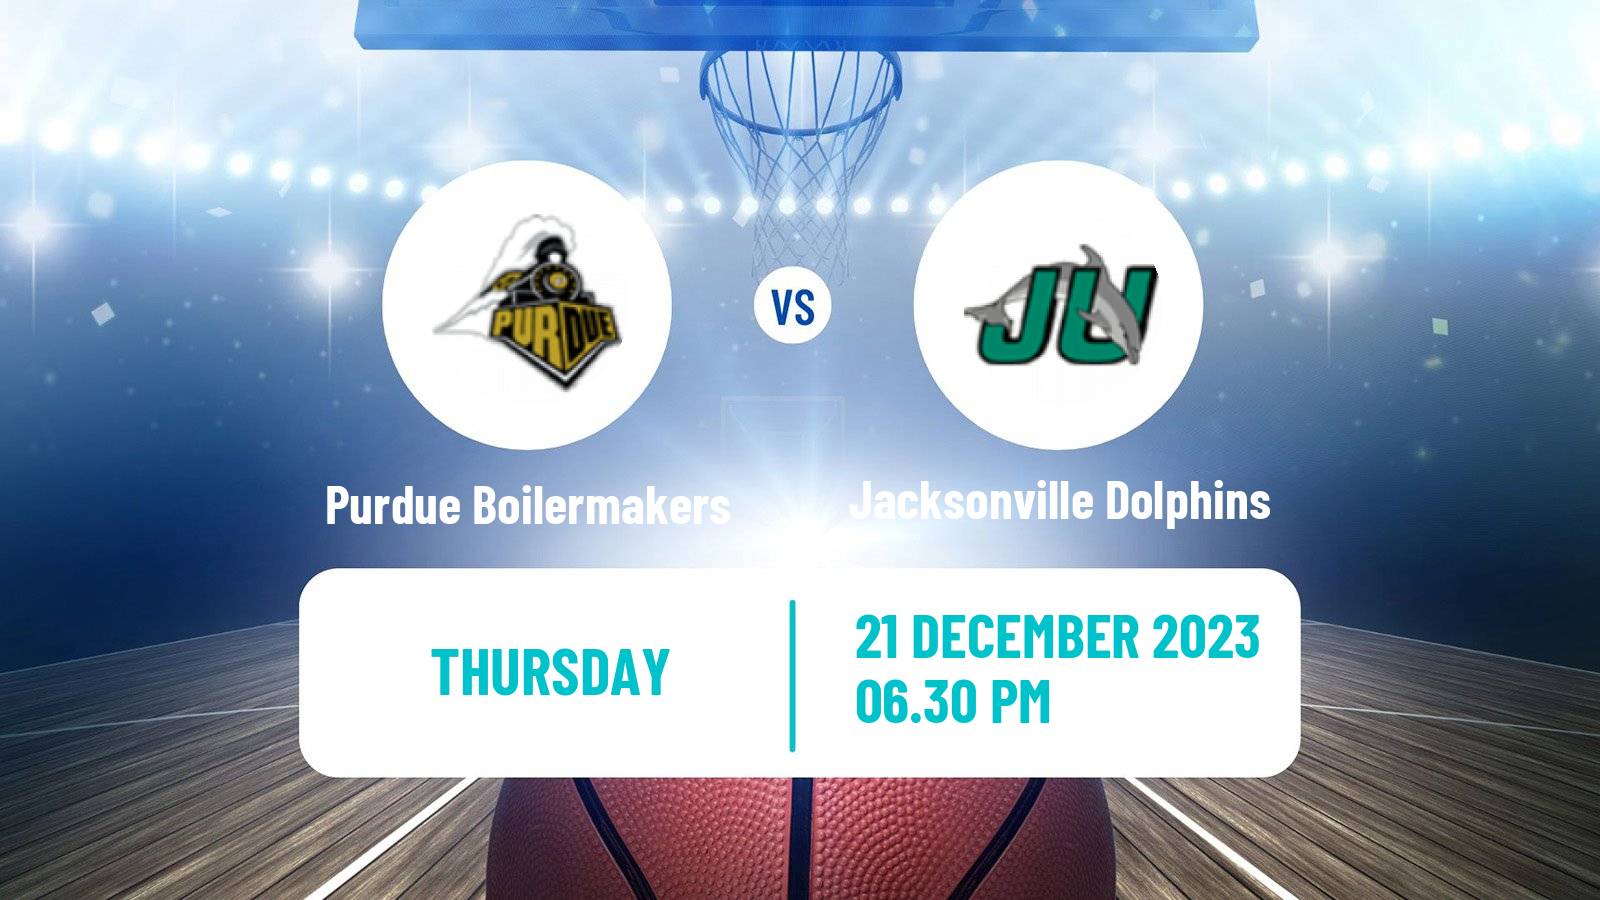 Basketball NCAA College Basketball Purdue Boilermakers - Jacksonville Dolphins